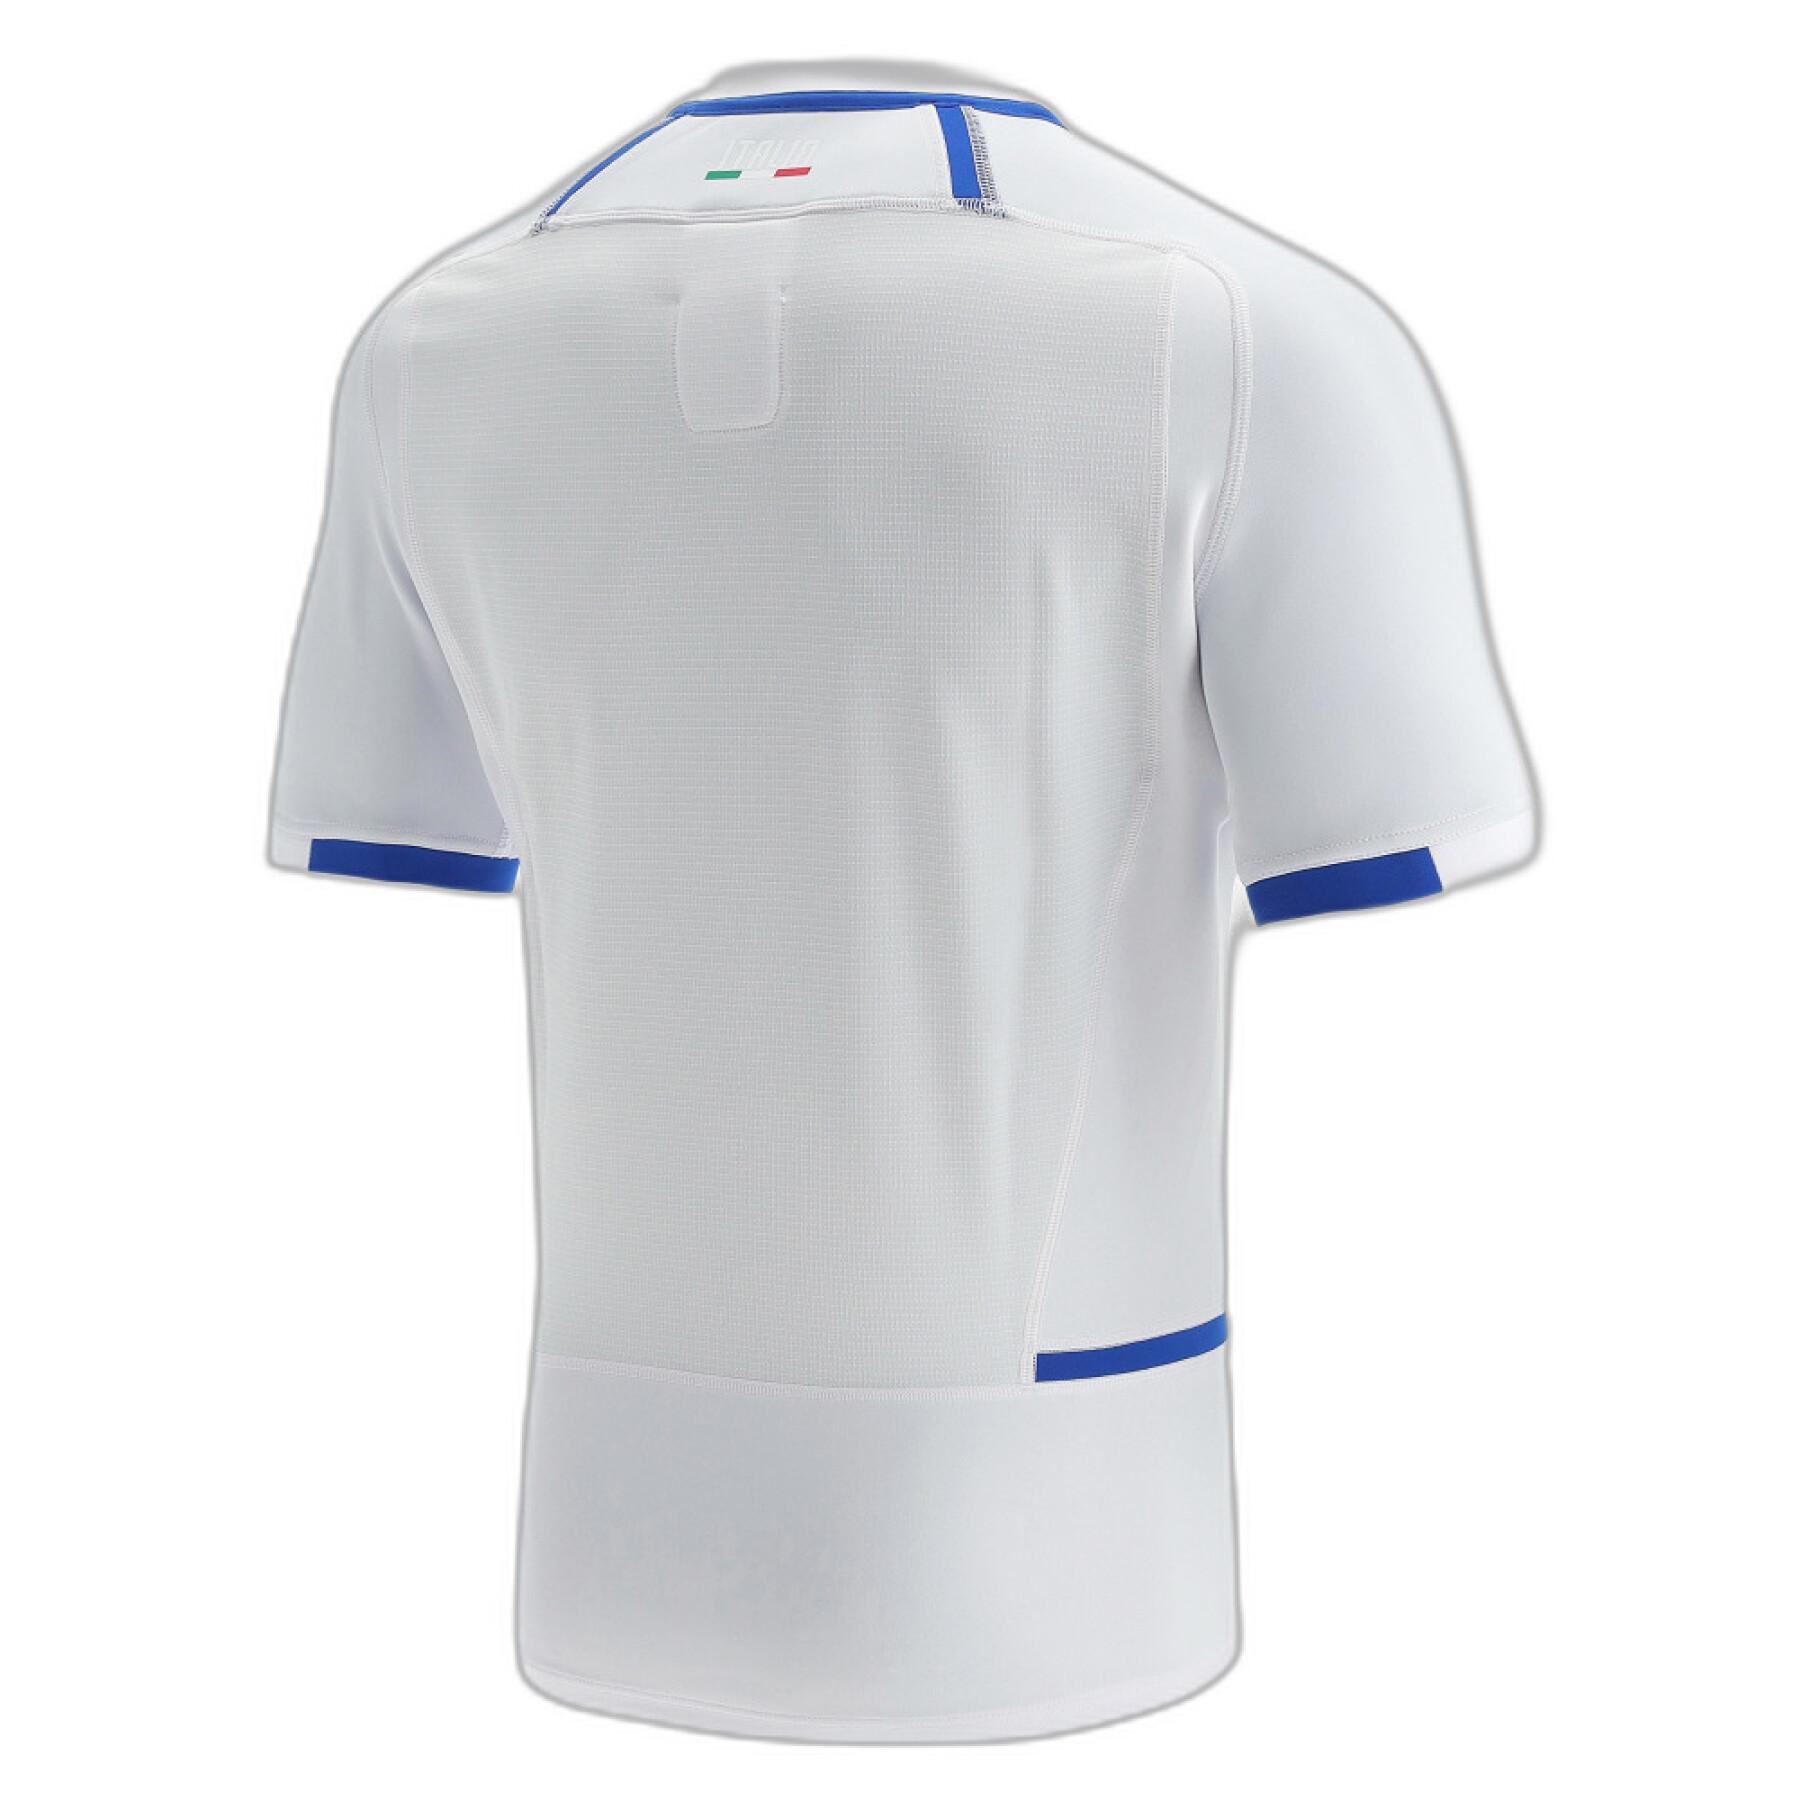 Authentic away jersey Italy Rugby 2020/21